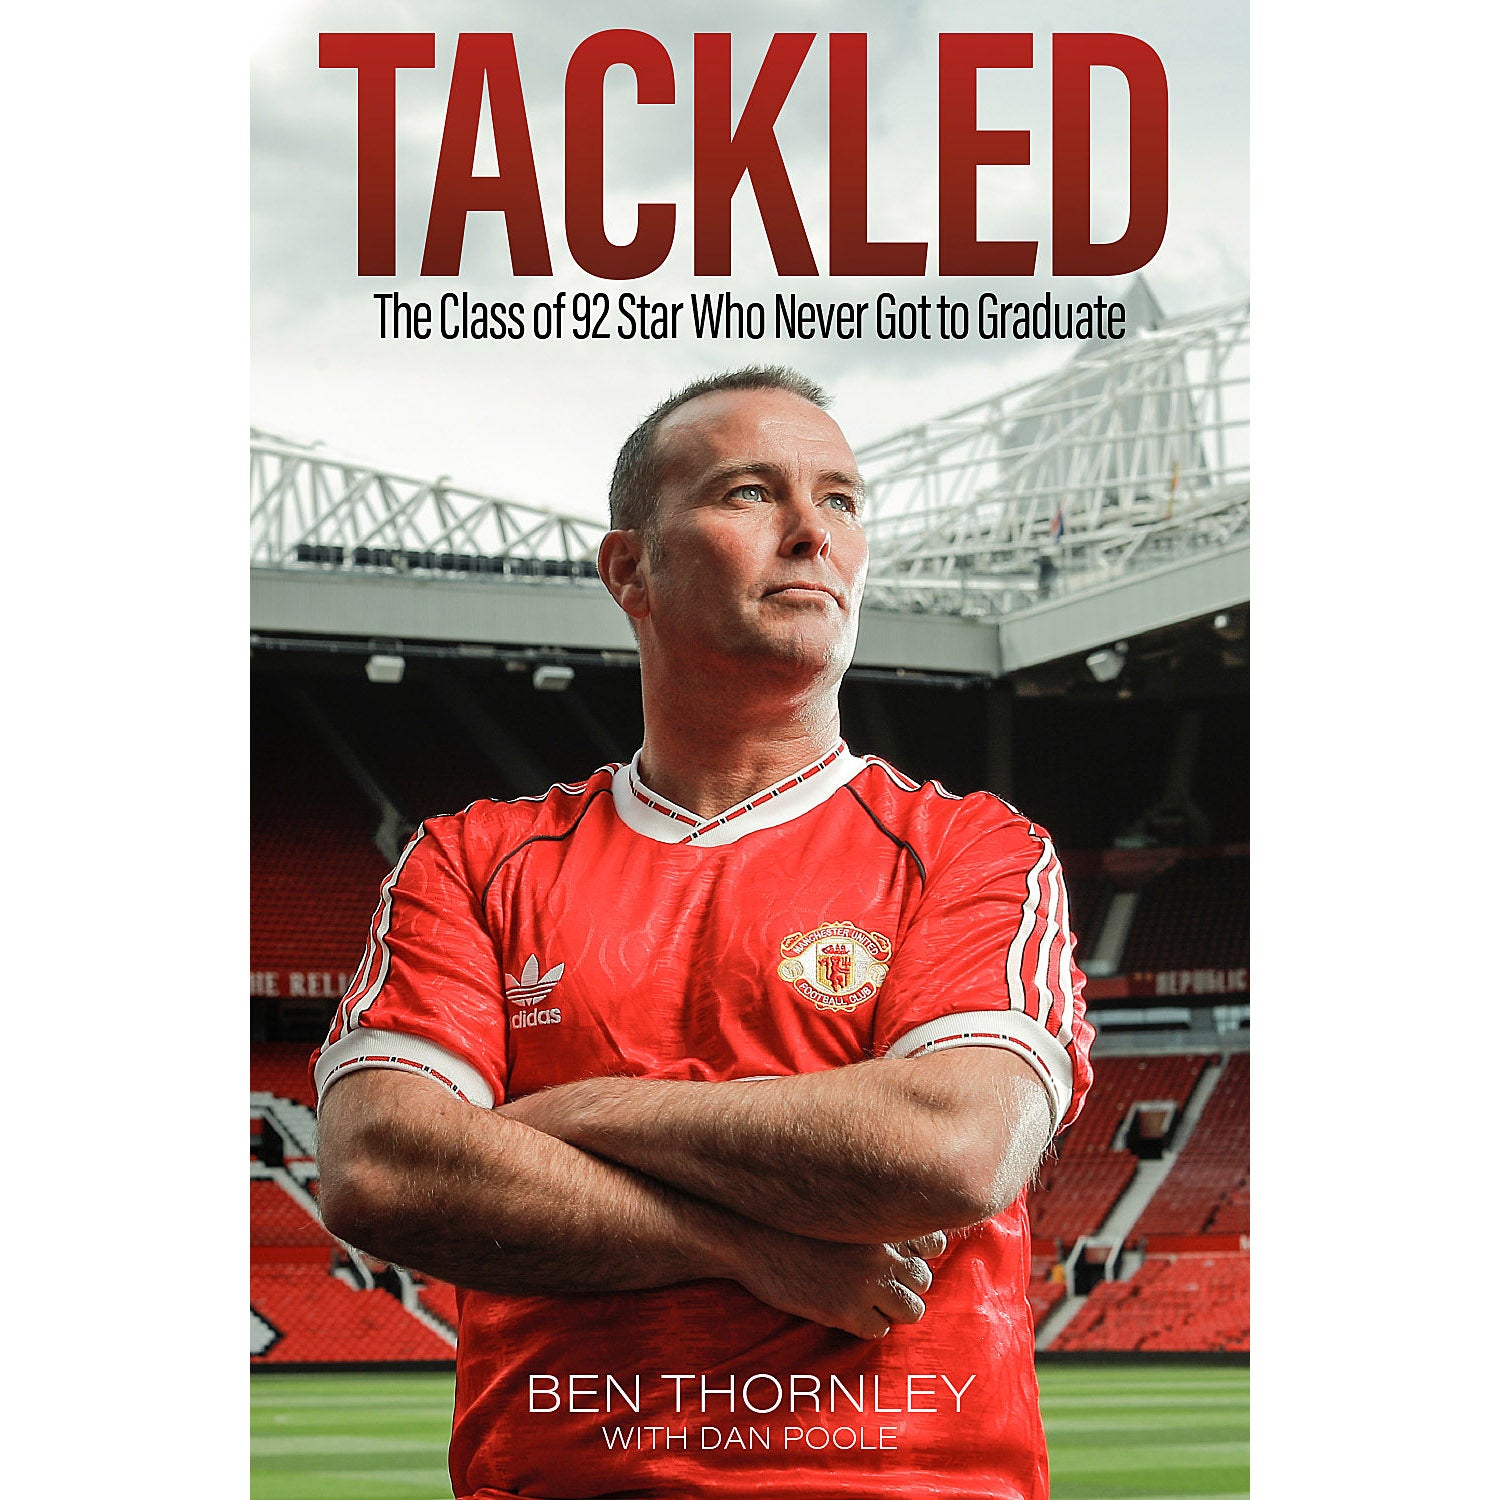 Tackled – Ben Thornley – The Class of 92 Star Who Never Got to Graduate